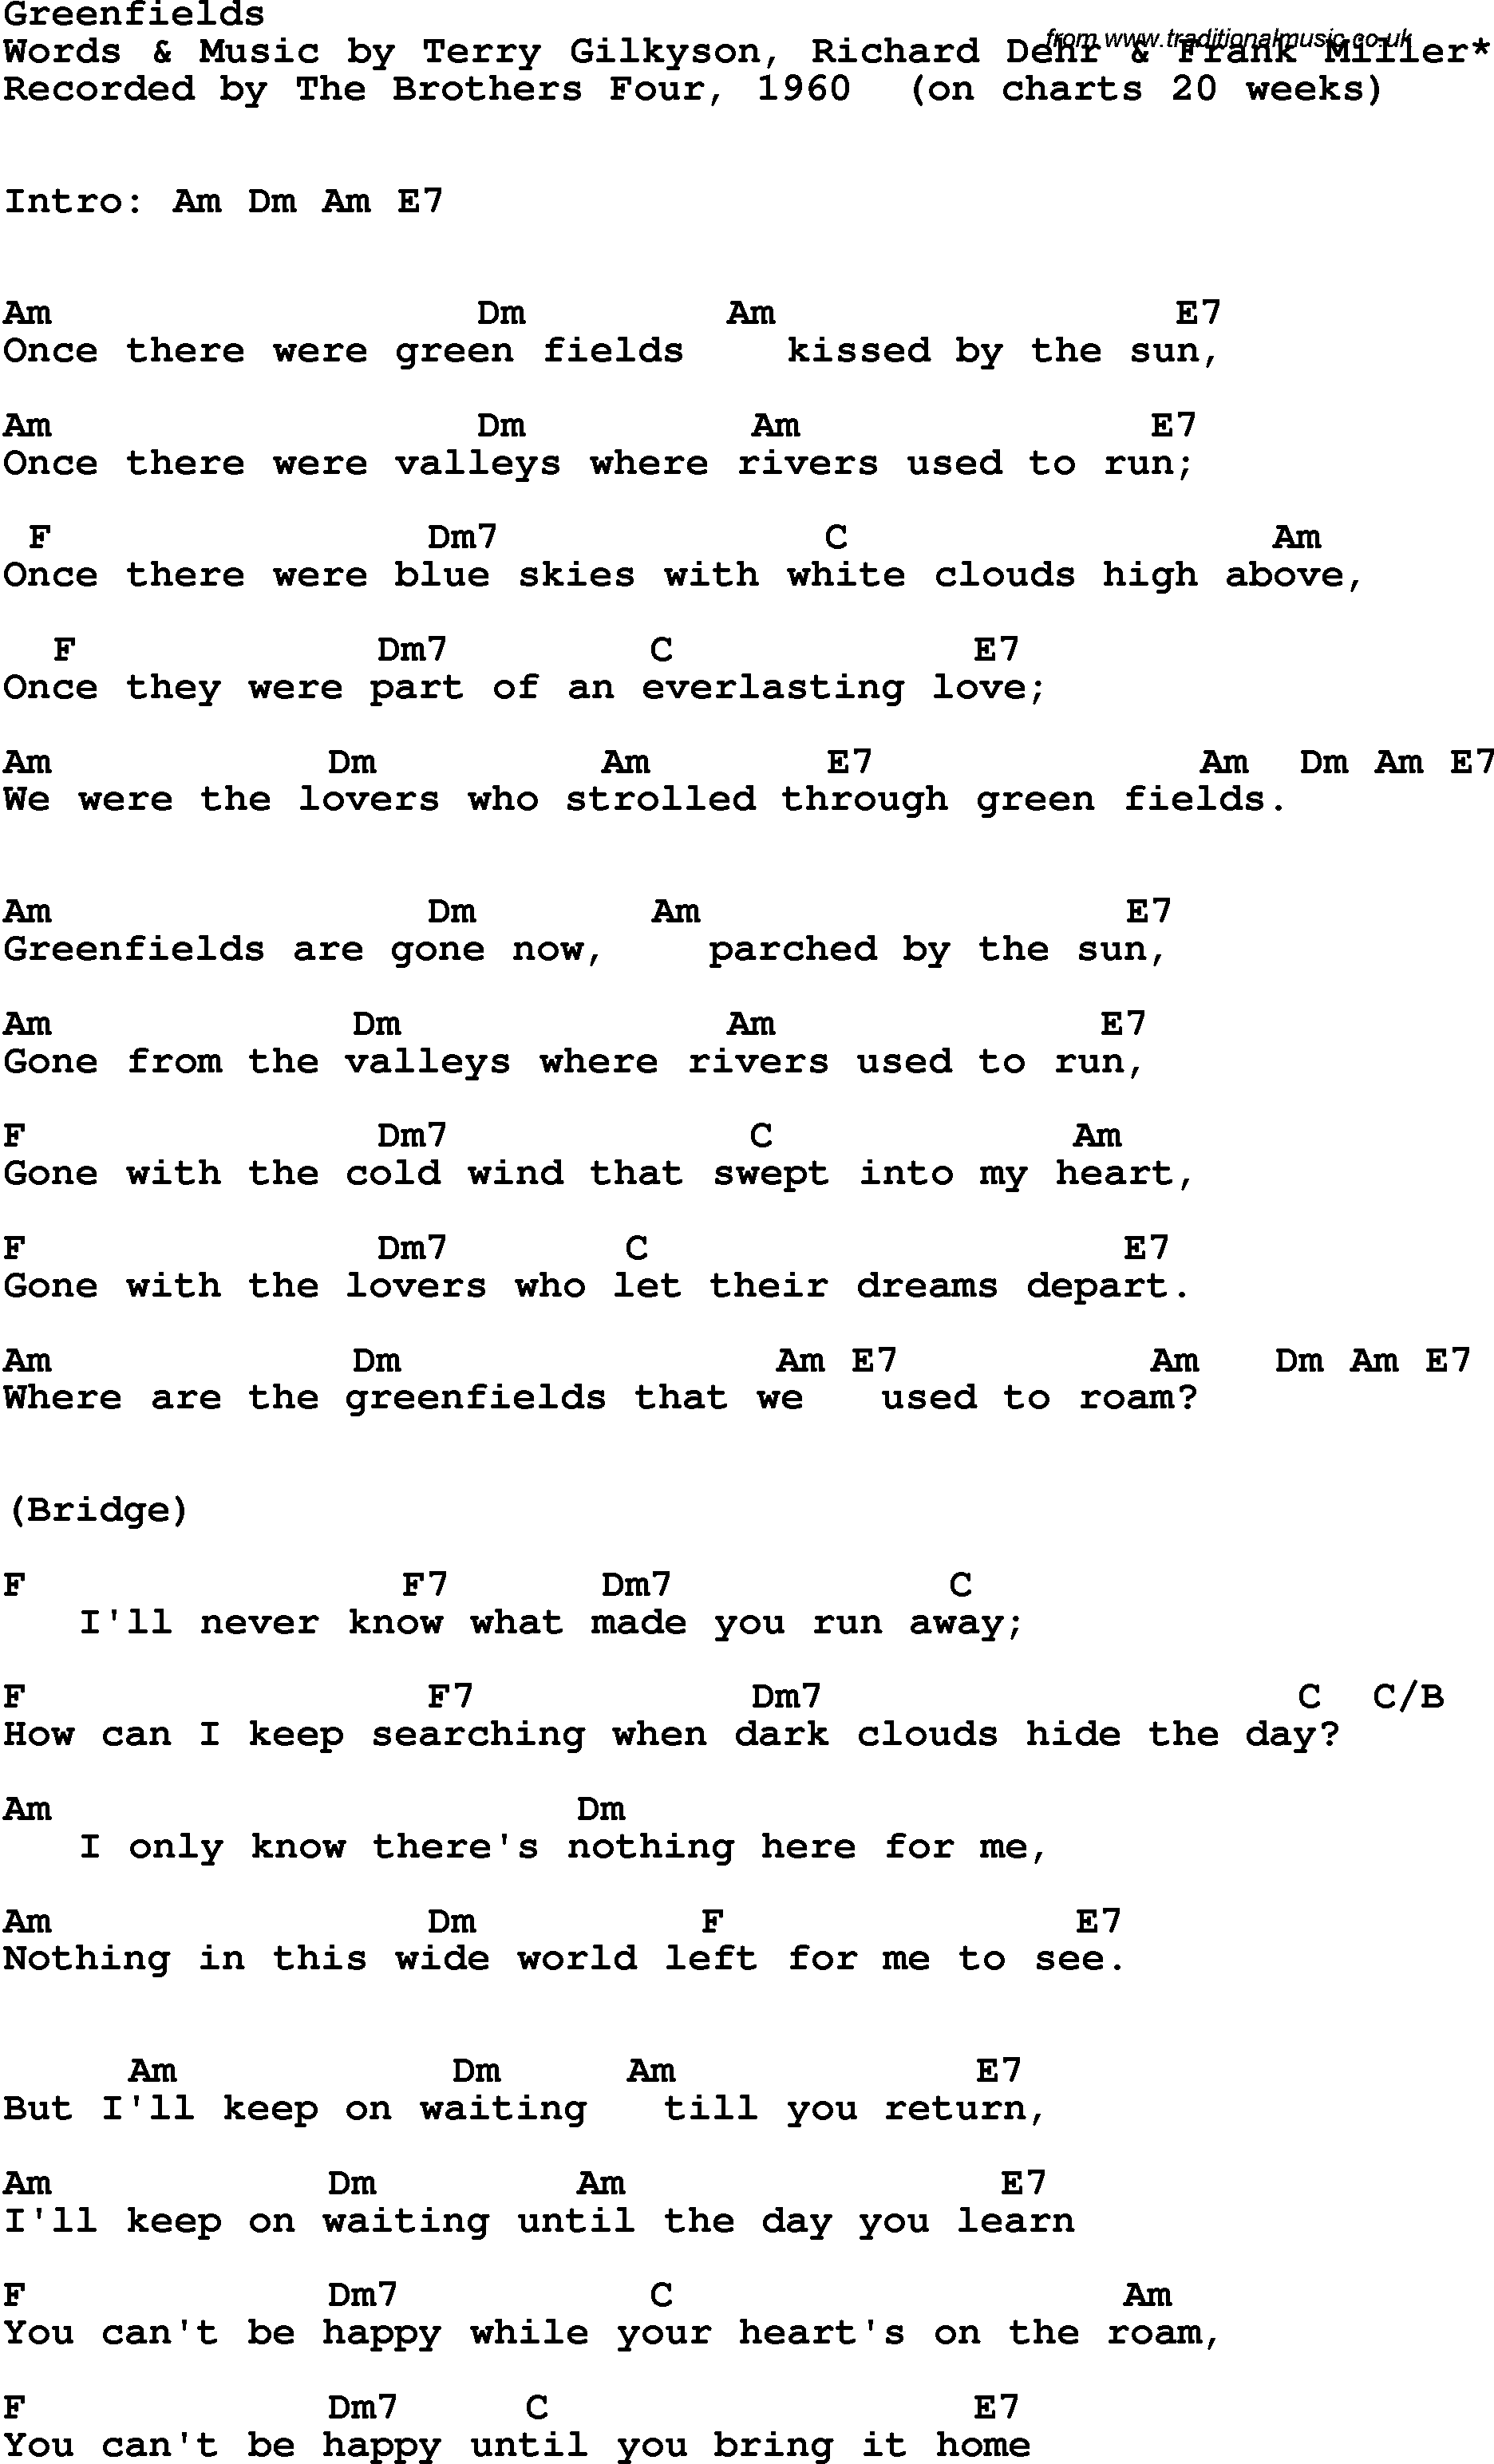 Song Lyrics with guitar chords for Greenfields - The Brothers Four, 1960